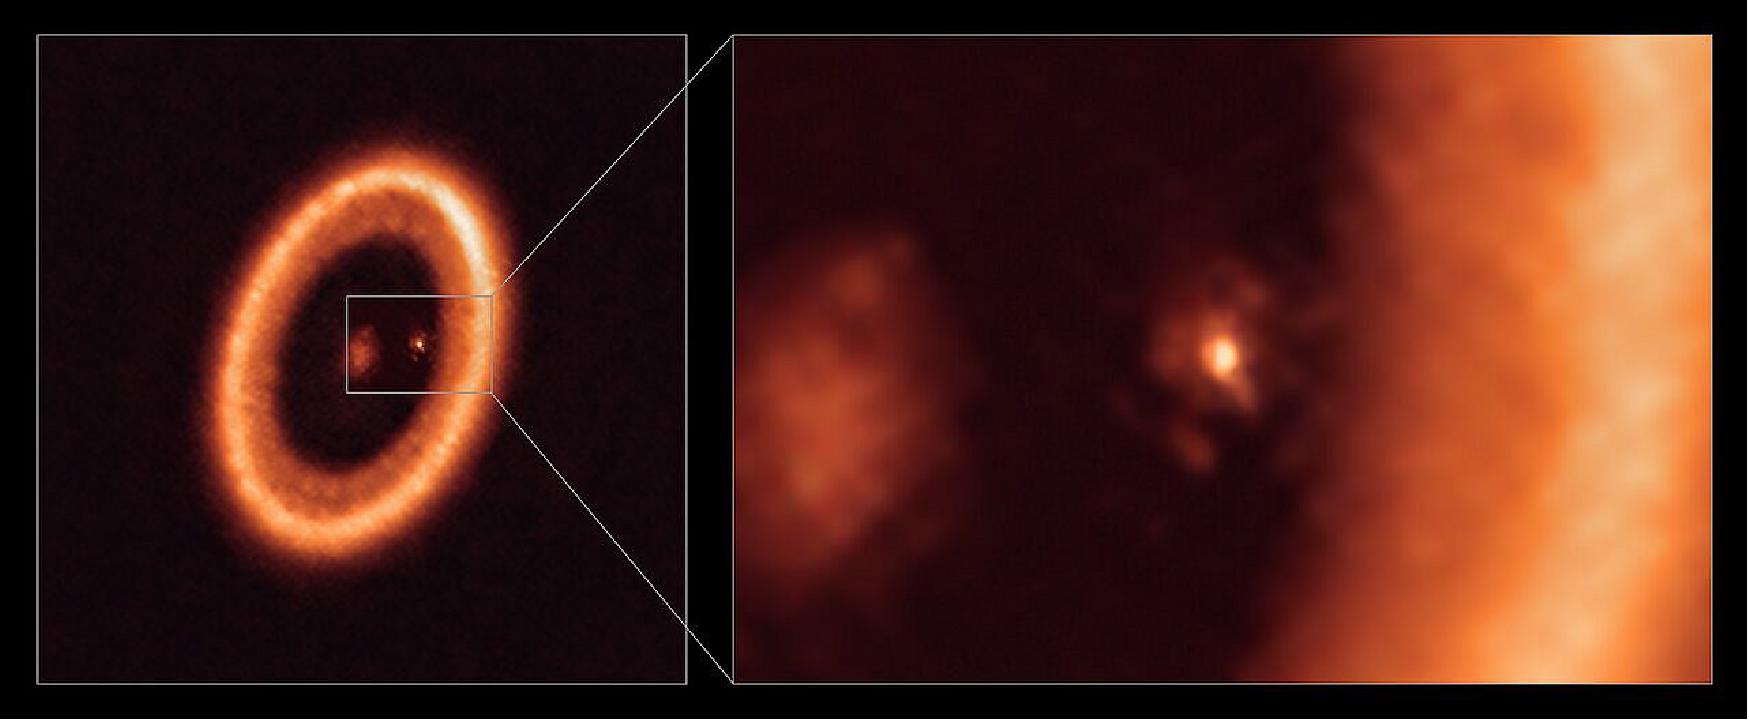 Figure 35: Wide and close-up views of a moon-forming disc as seen with ALMA. This image, taken with ALMA, in which ESO is a partner, shows wide (left) and close-up (right) views of the moon-forming disc surrounding PDS 70c, a young Jupiter-like planet nearly 400 light-years away. The close-up view shows PDS 70c and its circumplanetary disc center-front, with the larger circumstellar ring-like disc taking up most of the right-hand side of the image. The star PDS 70 is at the center of the wide-view image on the left . — Two planets have been found in the system, PDS 70c and PDS 70b, the latter not being visible in this image. They have carved a cavity in the circumstellar disc as they gobbled up material from the disc itself, growing in size. In this process, PDS 70c acquired its own circumplanetary disc, which contributes to the growth of the planet and where moons can form. This circumplanetary disc is as large as the Sun-Earth distance and has enough mass to form up to three satellites the size of the Moon (image credit: ALMA (ESO/NAOJ/NRAO)/Benisty et al.)